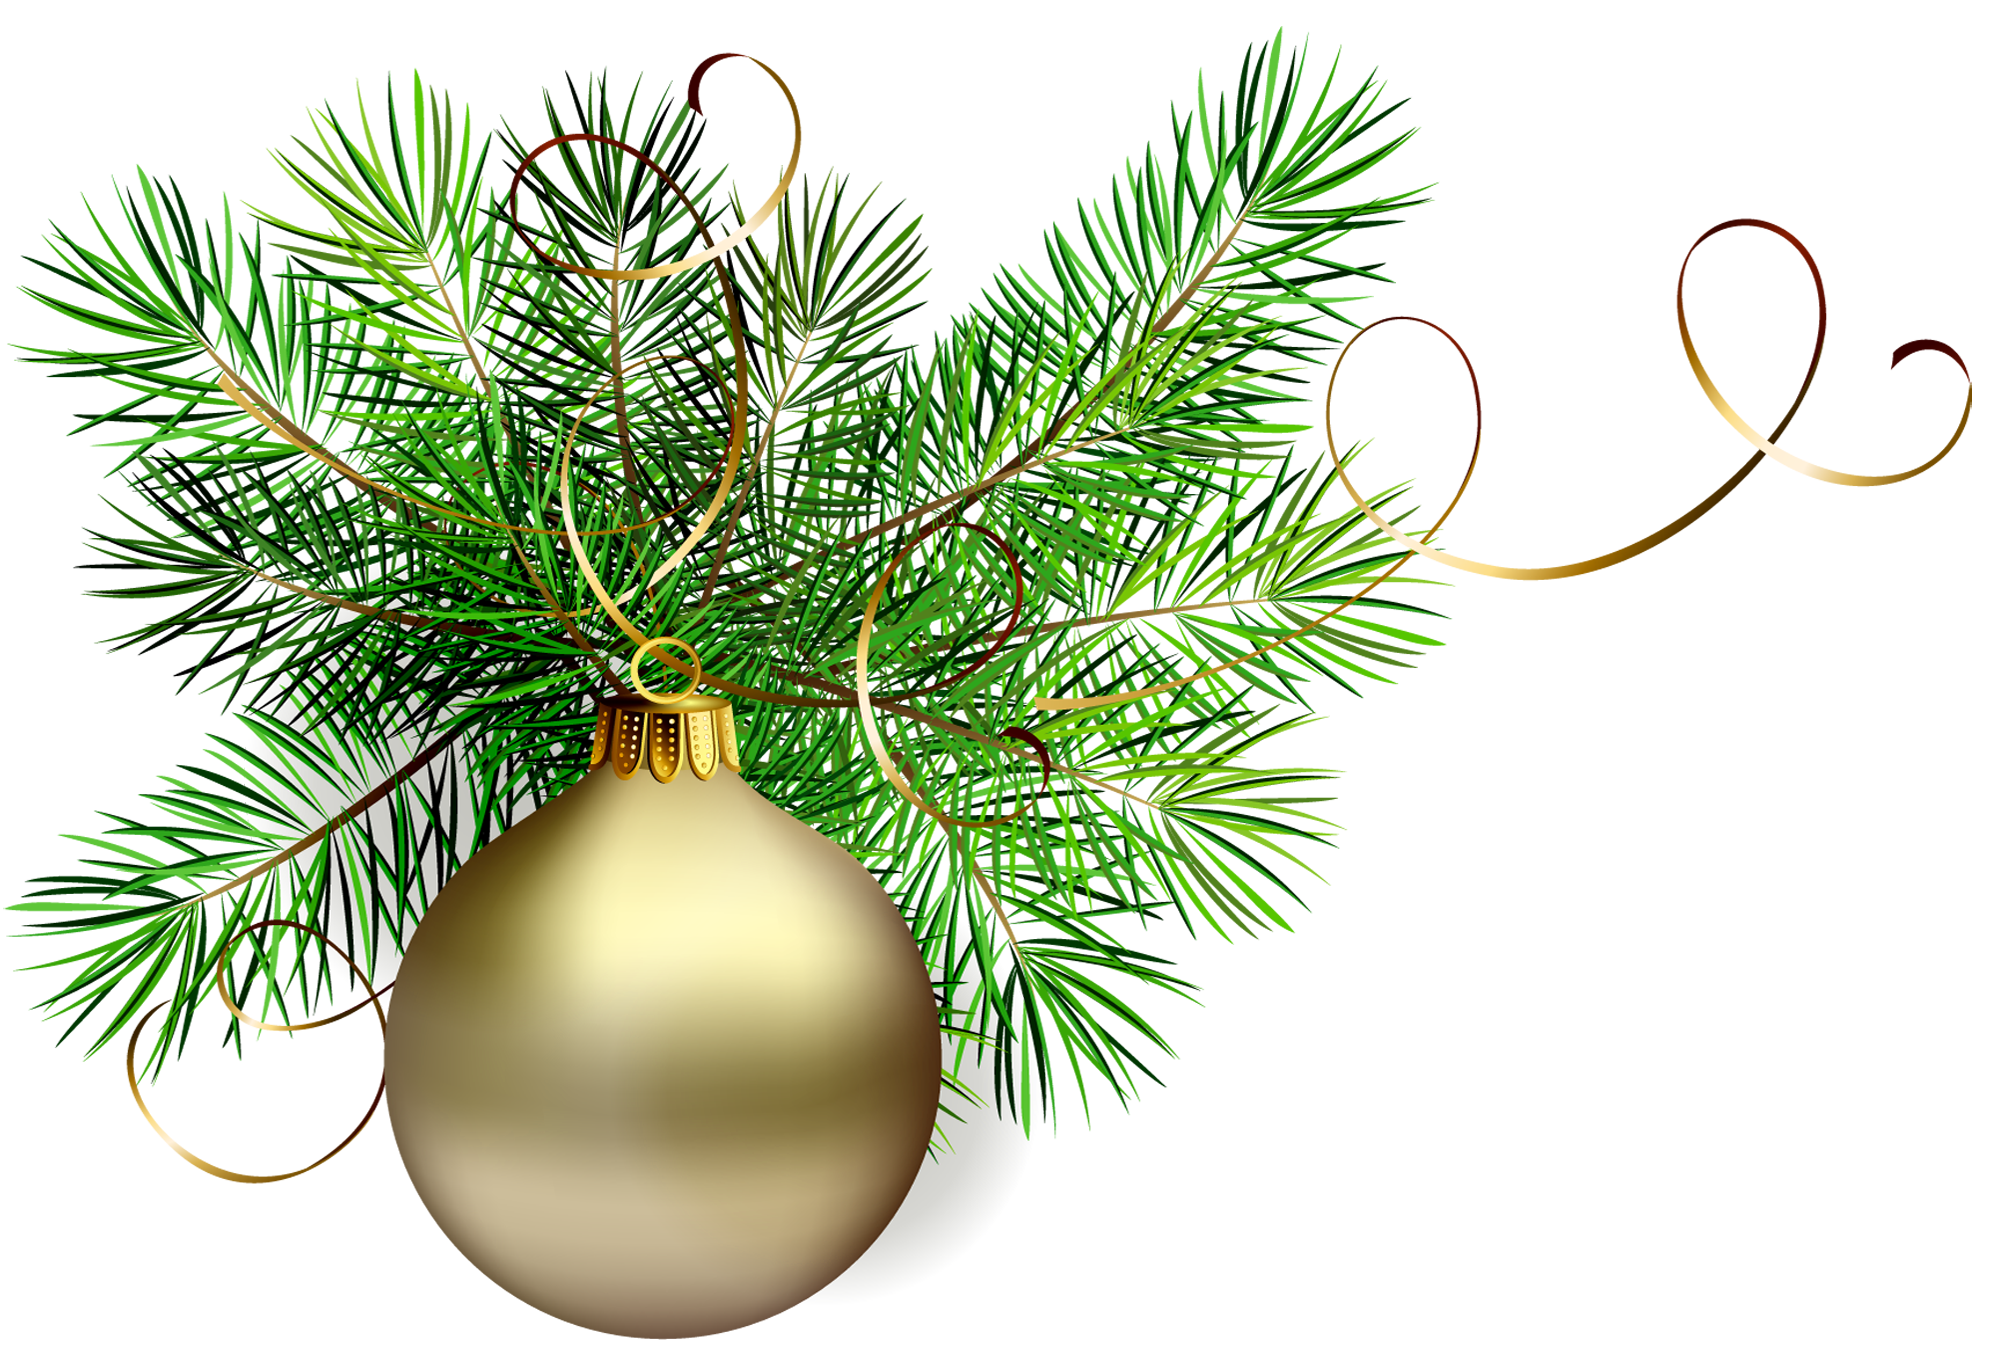 Free Transparent Christmas Cliparts, Download Free Clip Art